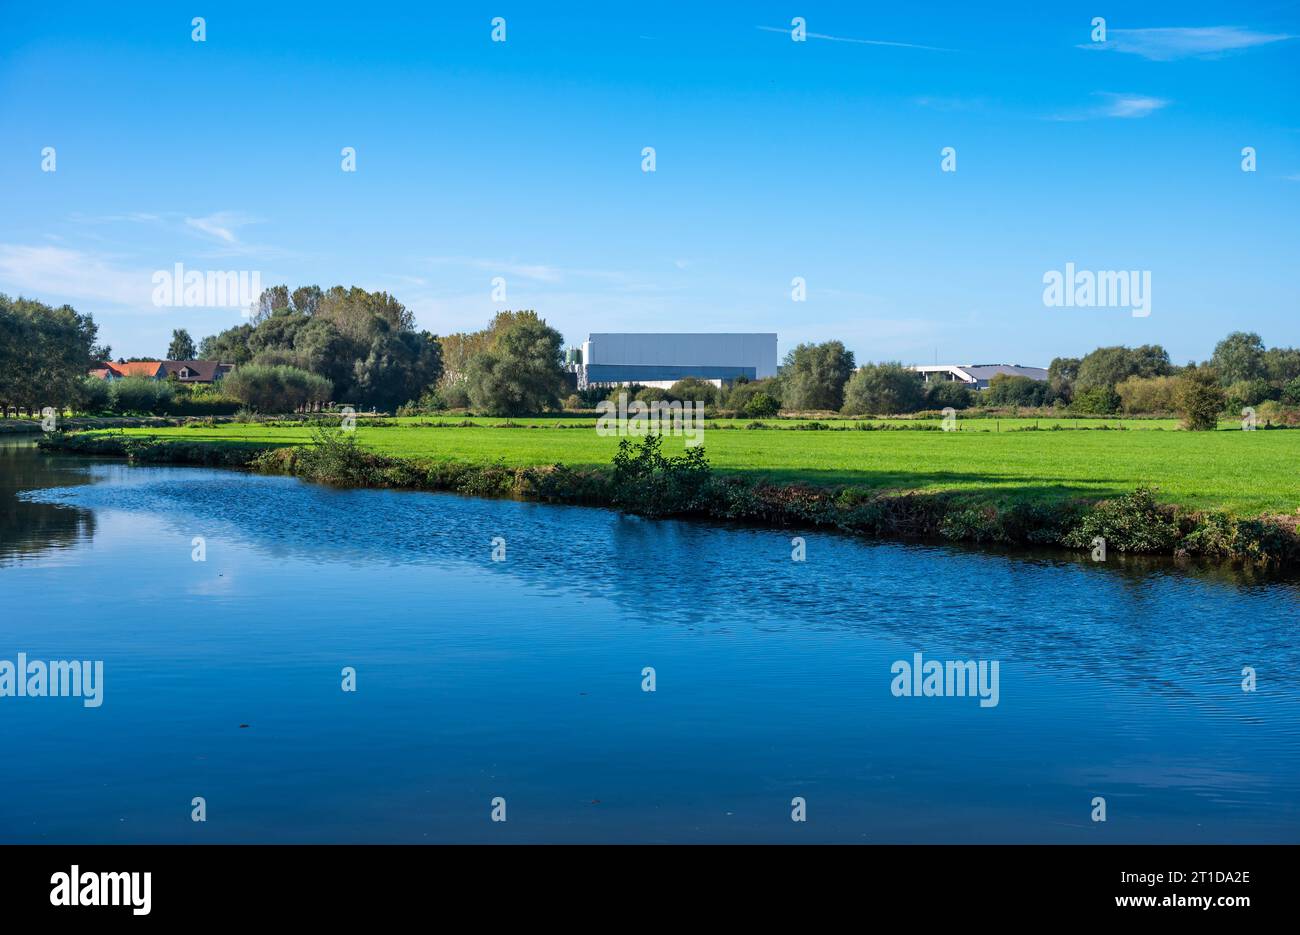 Industrial buidling reflecting in the water of the river Dender, Ninove, East Flemish Region, Belgium Credit: Imago/Alamy Live News Stock Photo